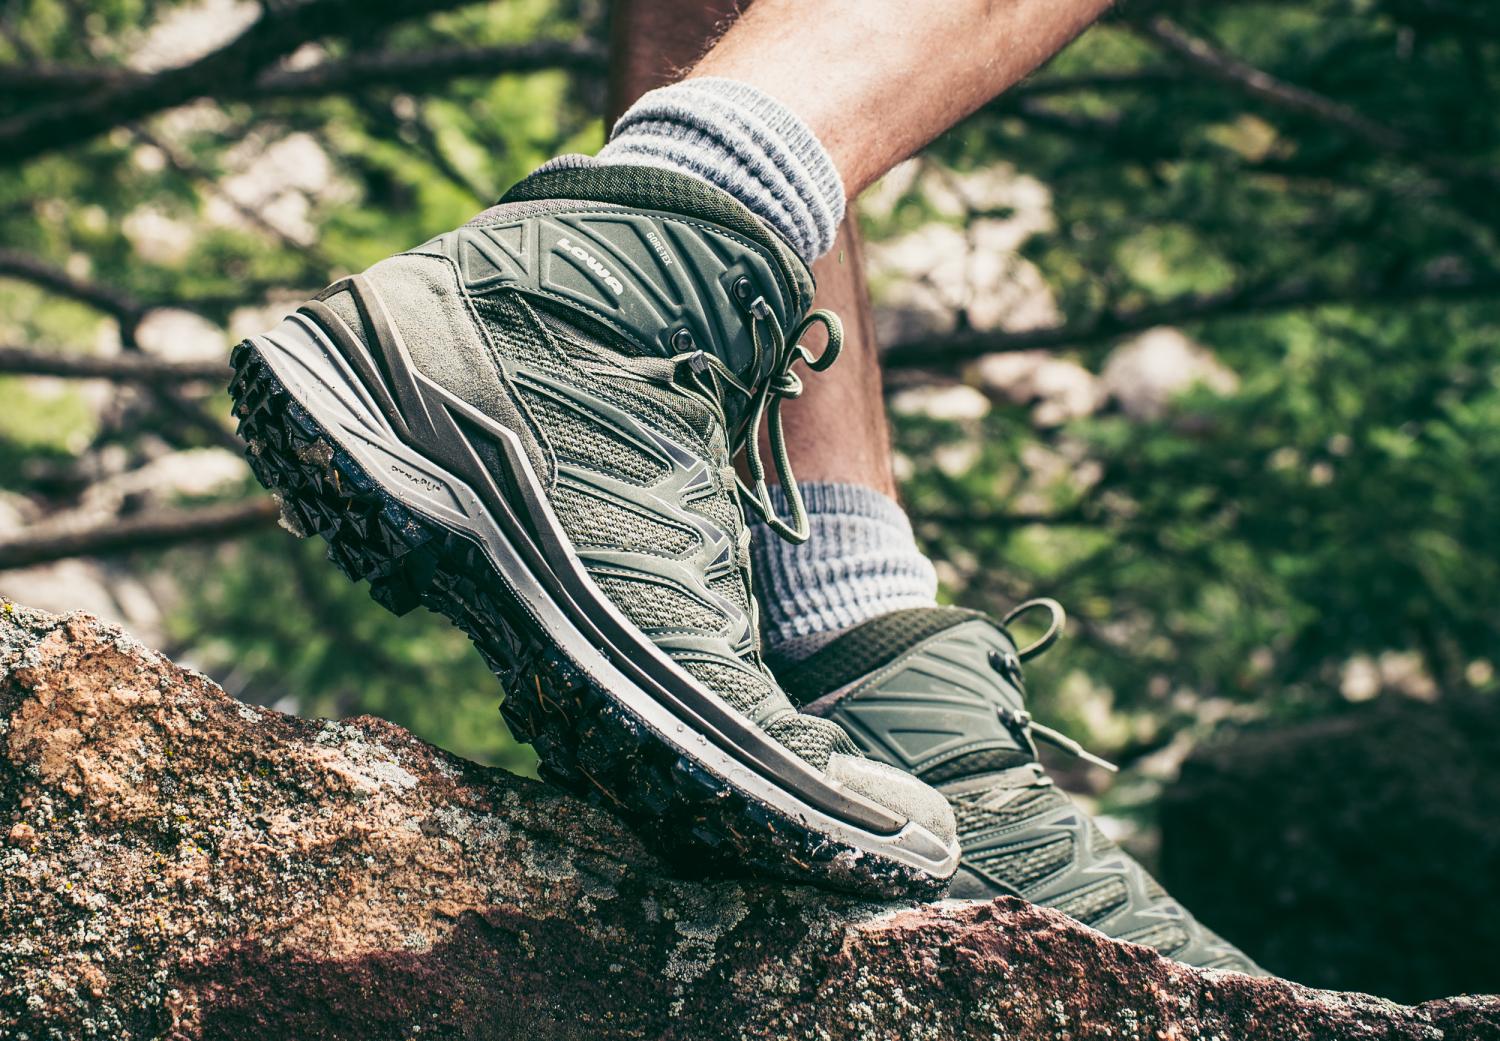 The Innox Pro GTX Recommended By Forbes For Getting Outside Spring | LOWA Boots USA